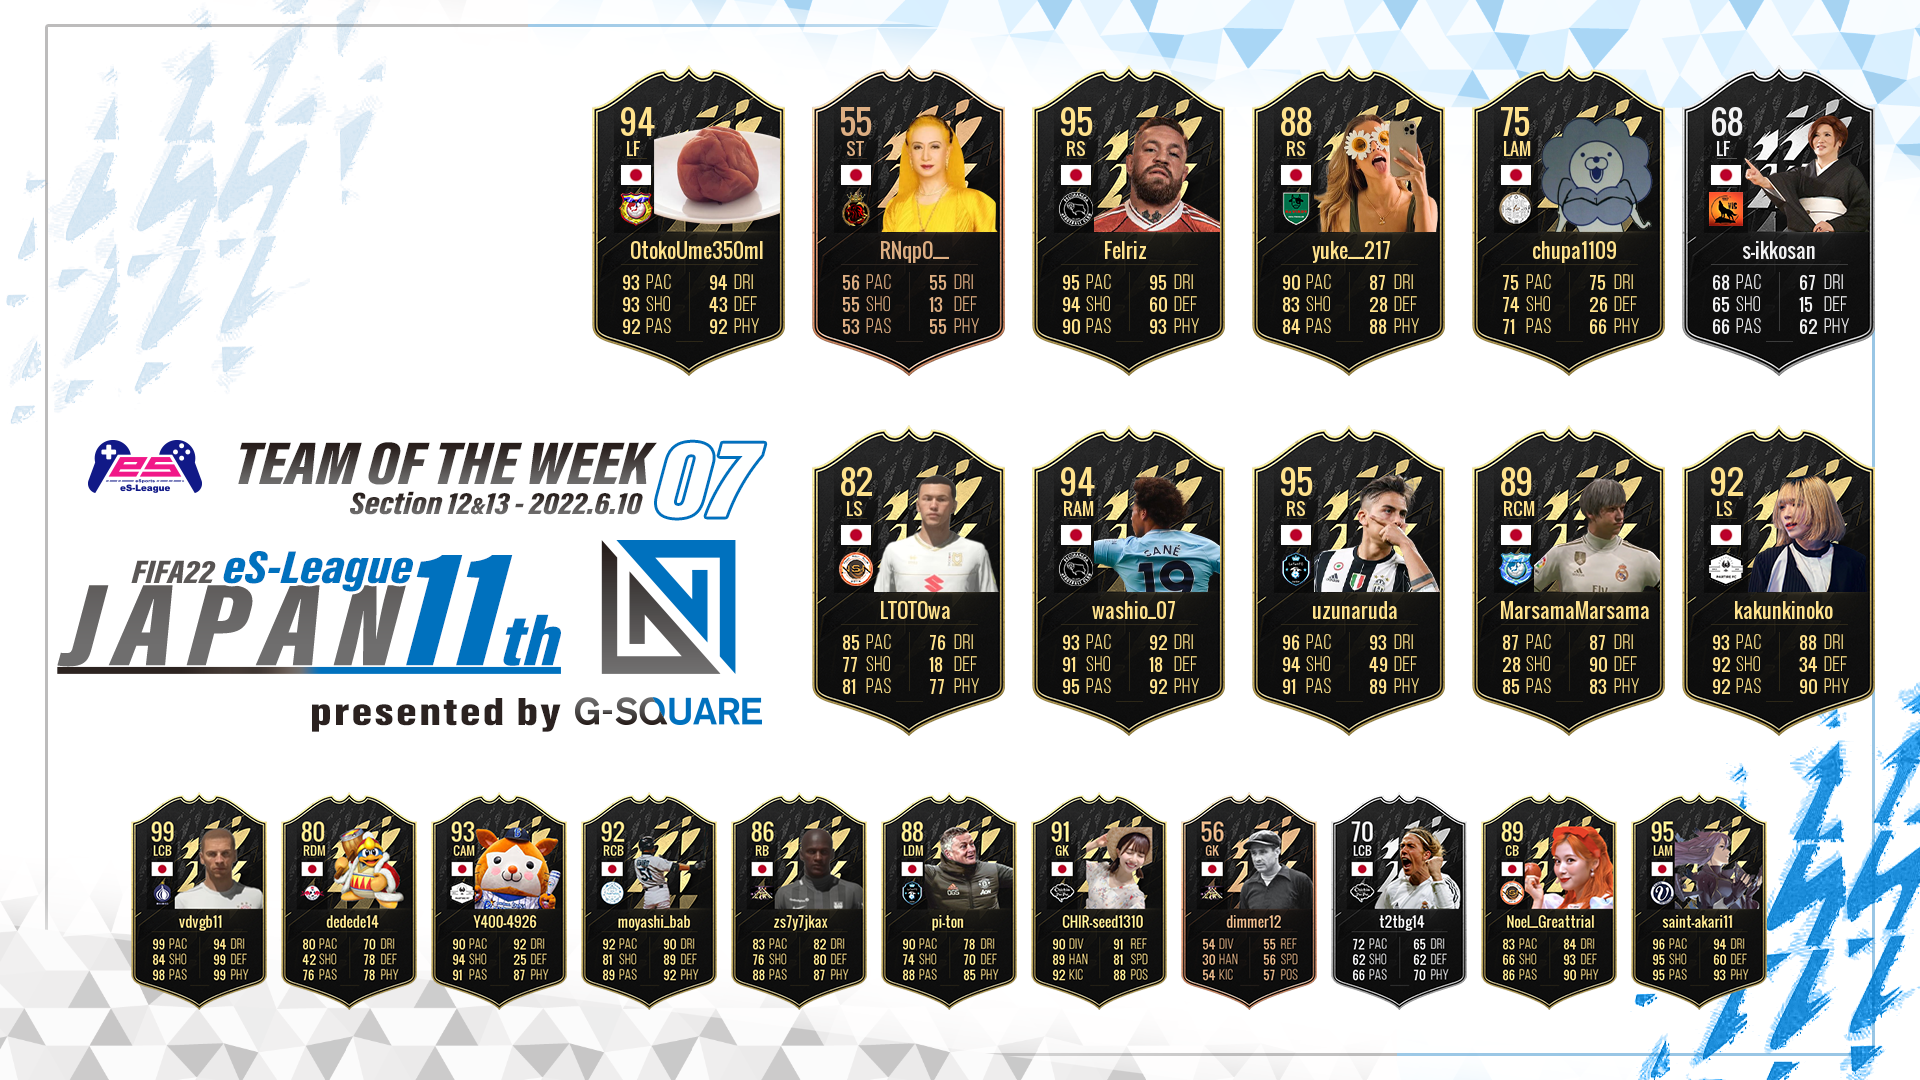 FIFA22 eS-League JAPAN 11th presented by G-SQUARE TOTW07